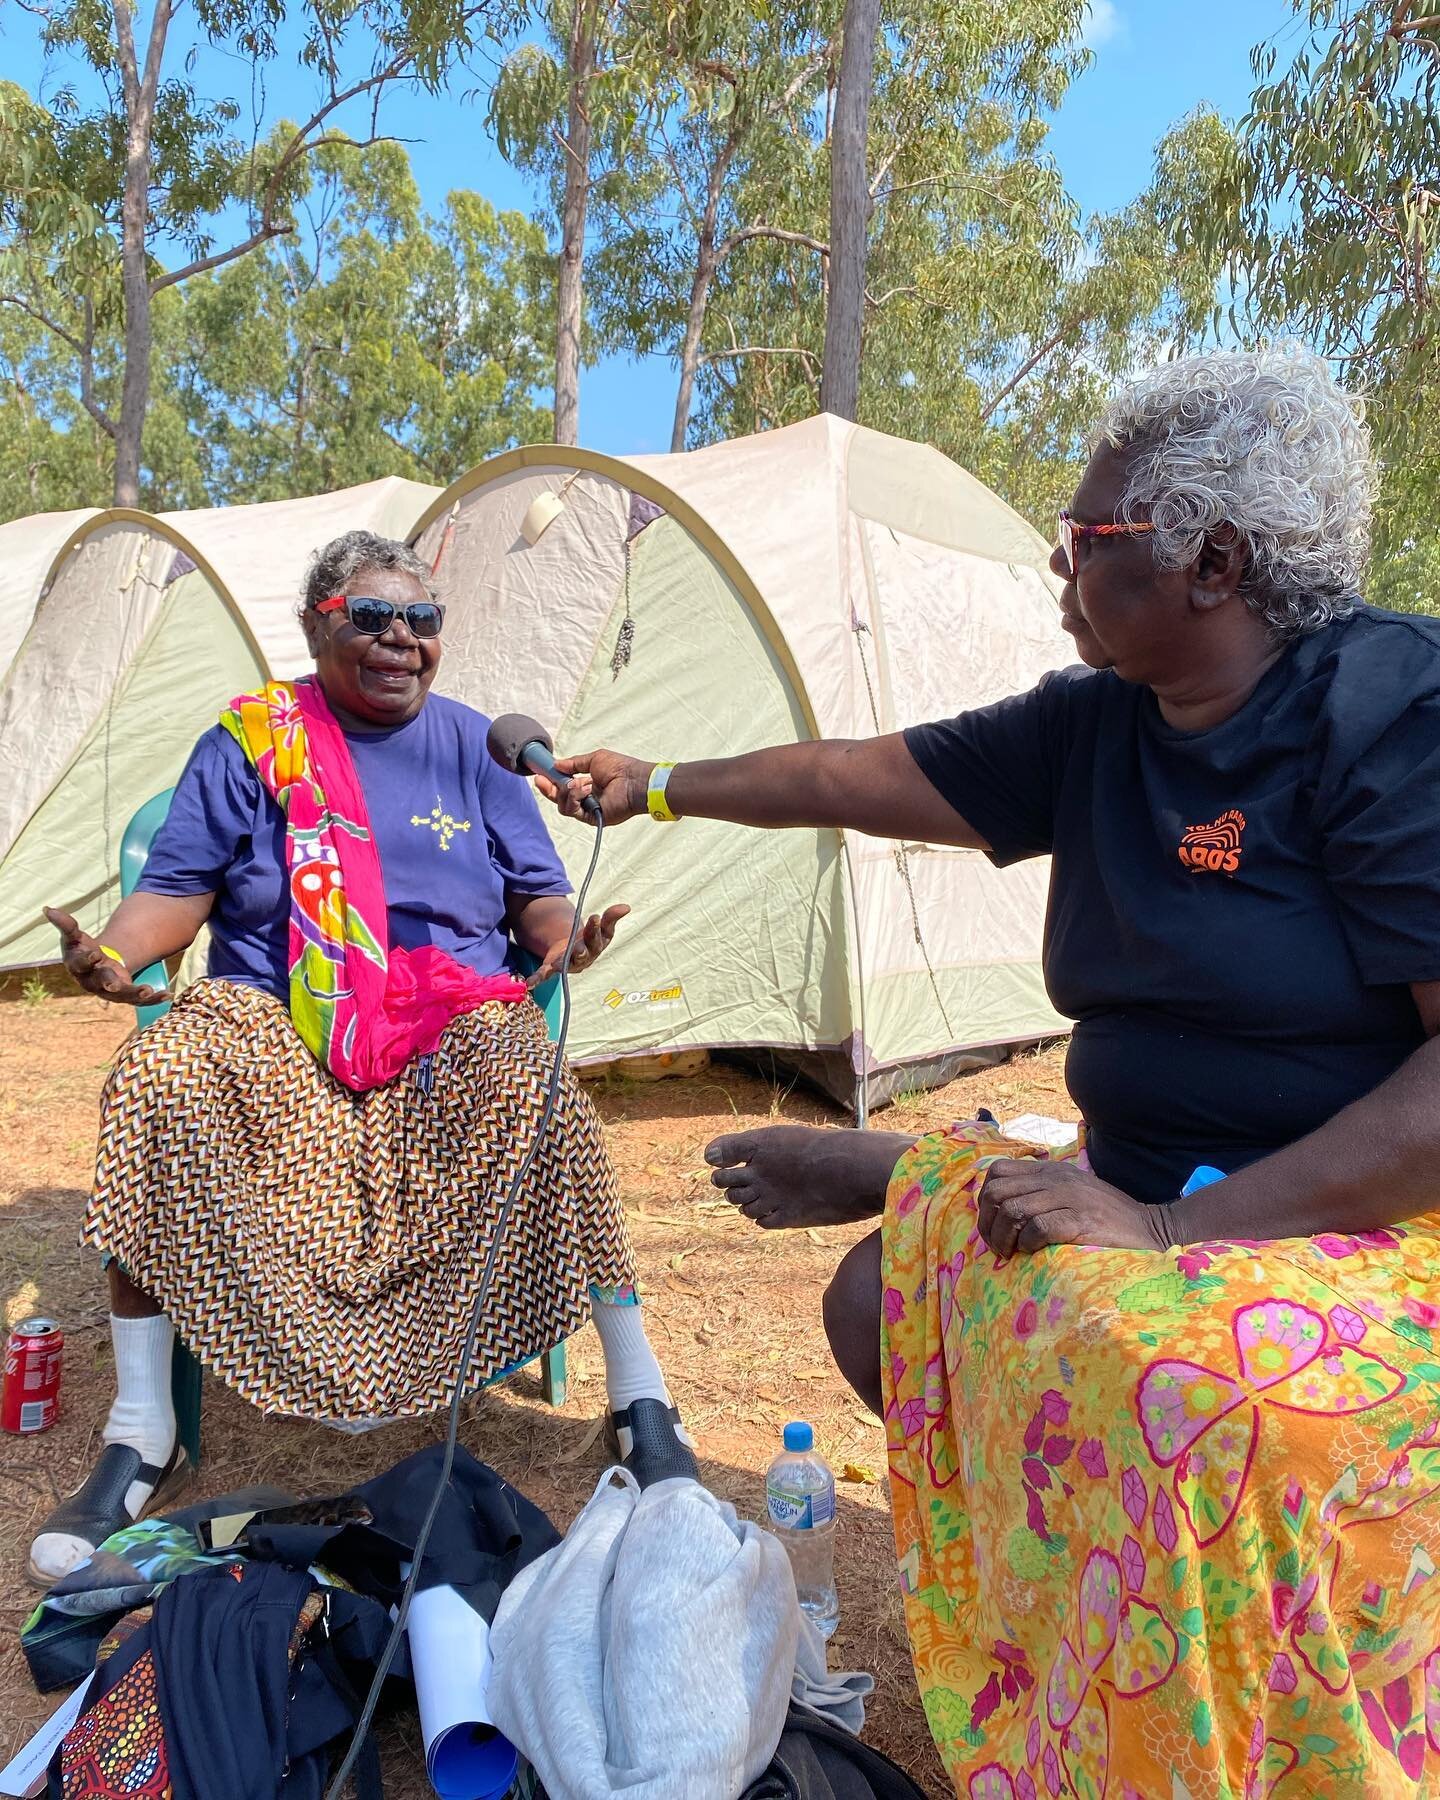 Garma 2022, day 2.

Talking to friends, old and new. Tune into 88.9FM throughout the week to hear the full story.